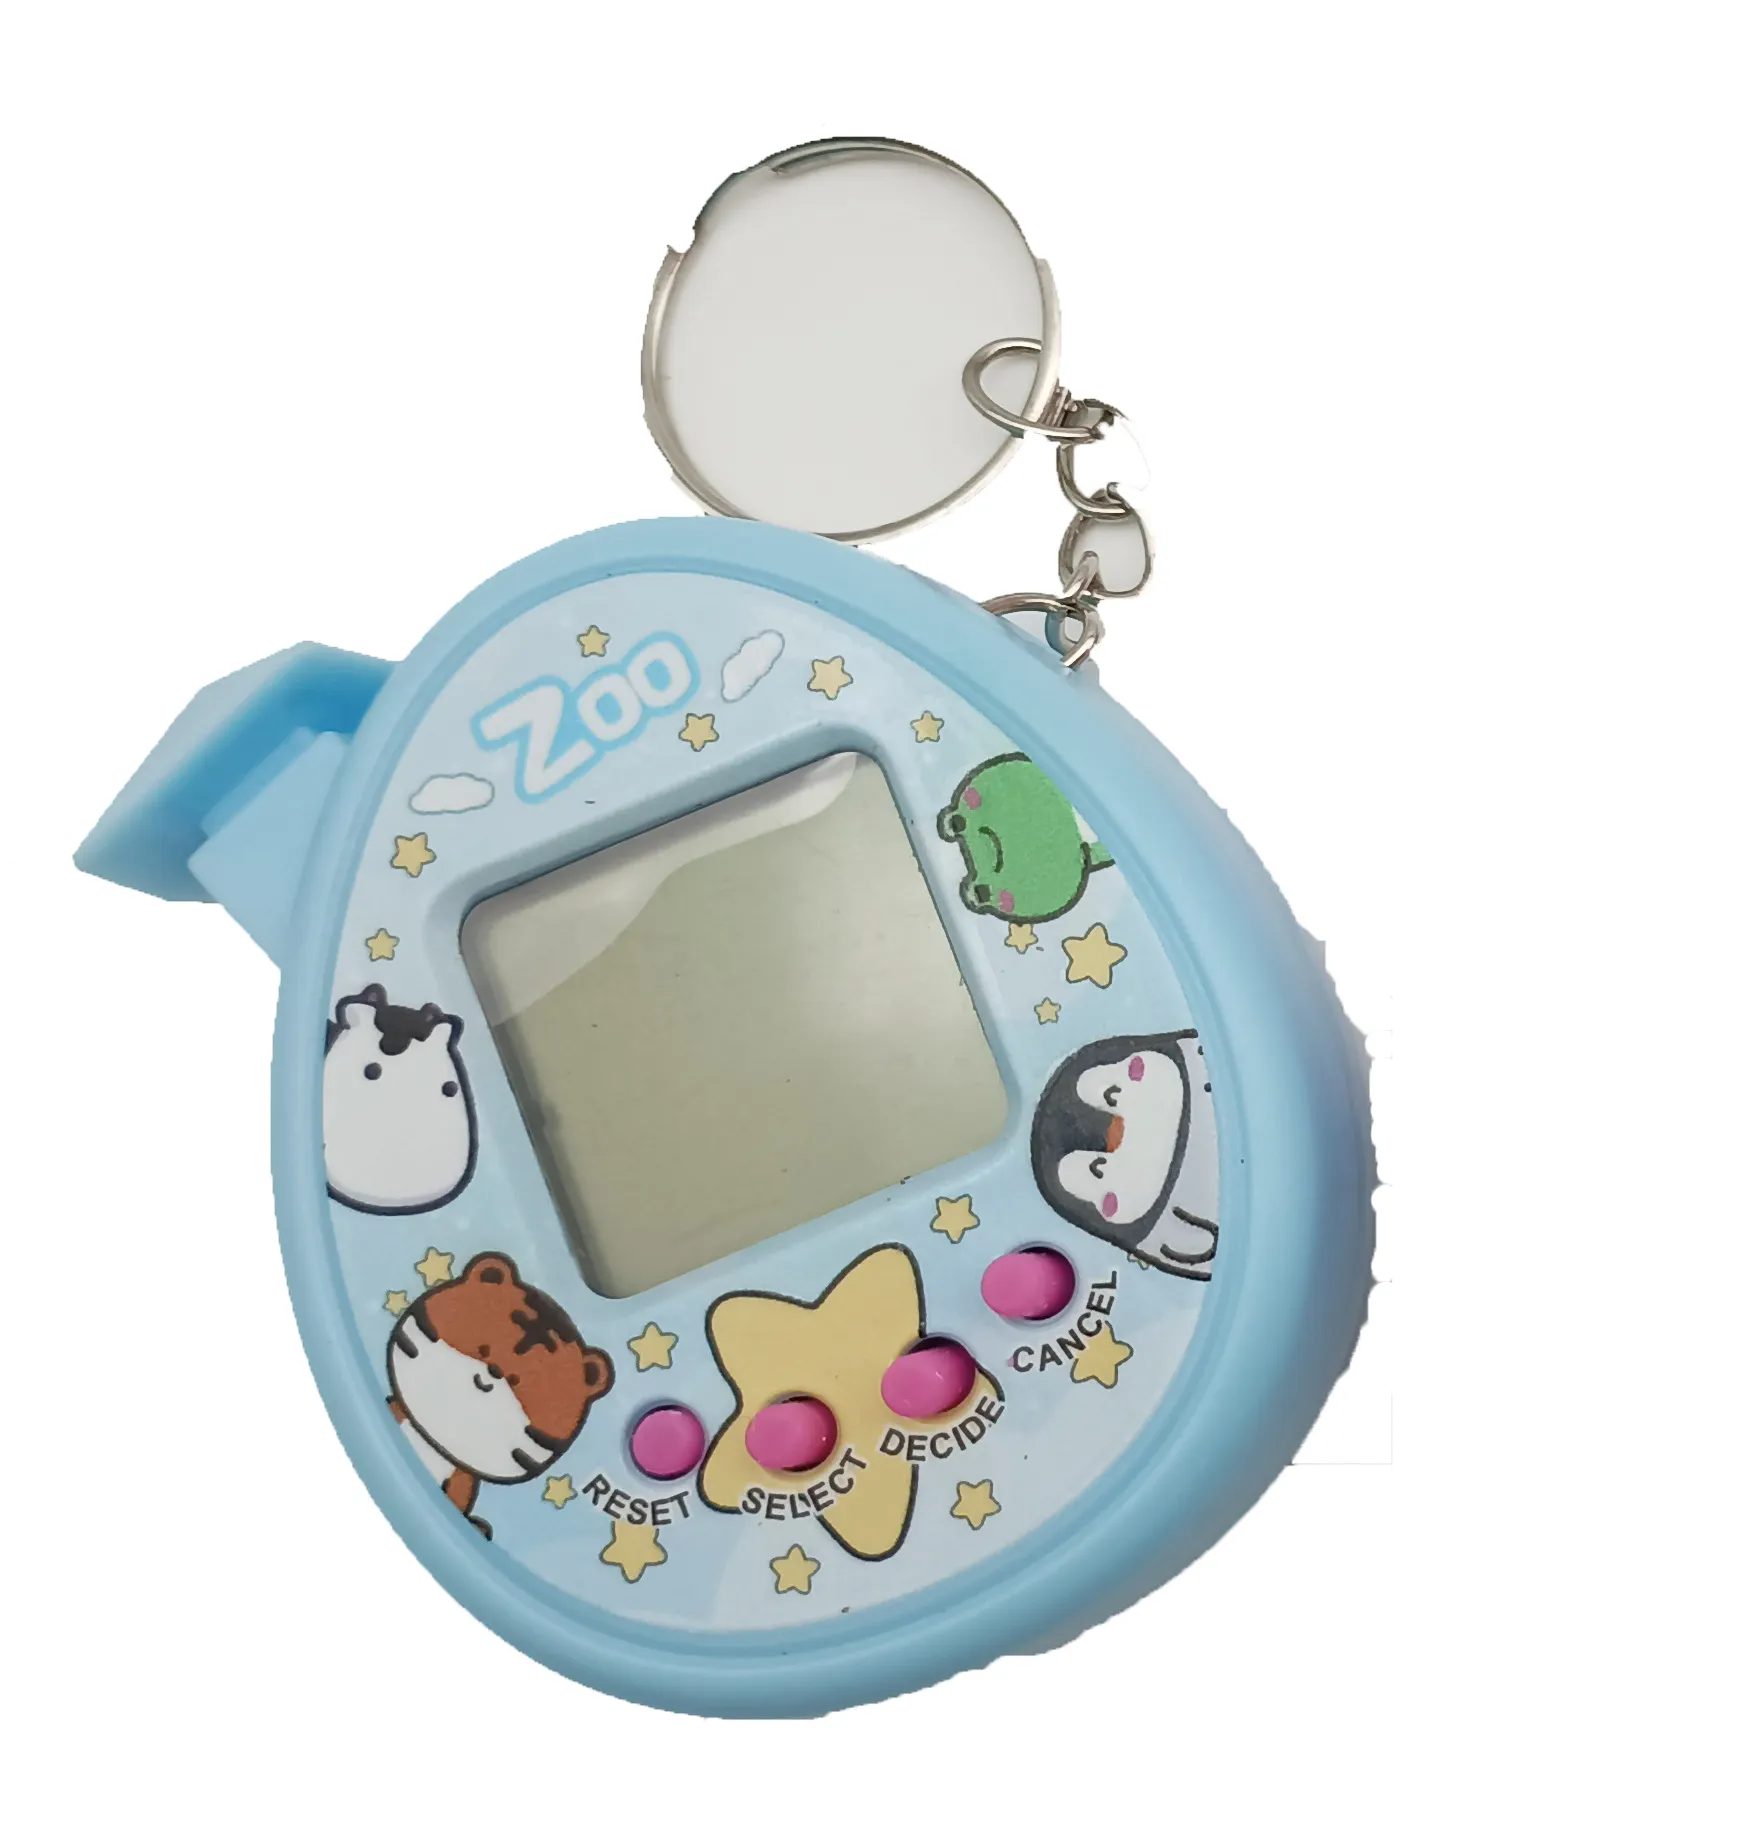 Cartoon classic pocket Game Console Use for Key Chain Pet machine small gifts for kids HN988500